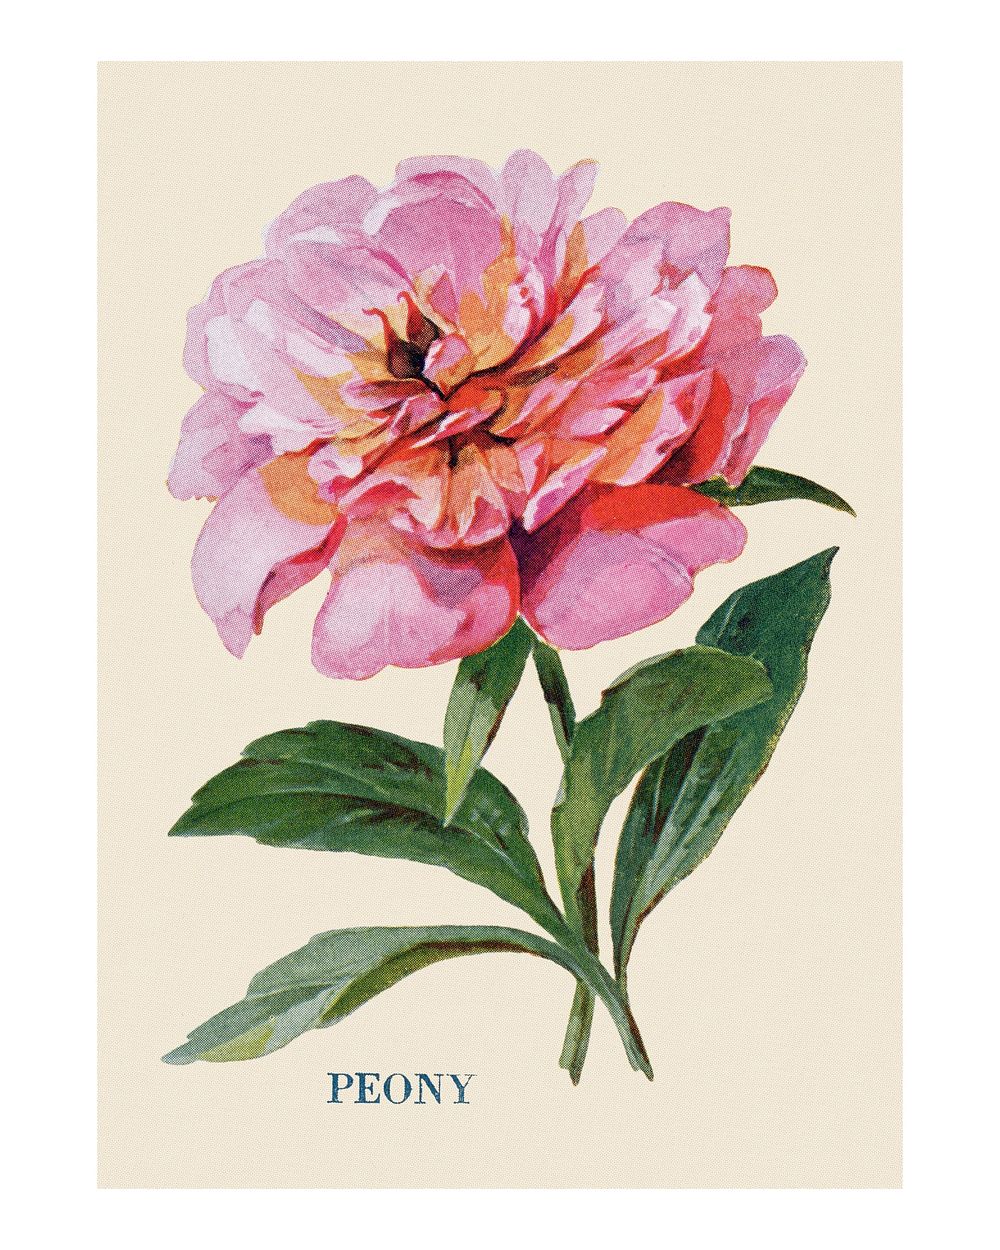 Peony flower poster, vintage watercolor painting, digitally enhanced from our own original copy of The Open Door to…